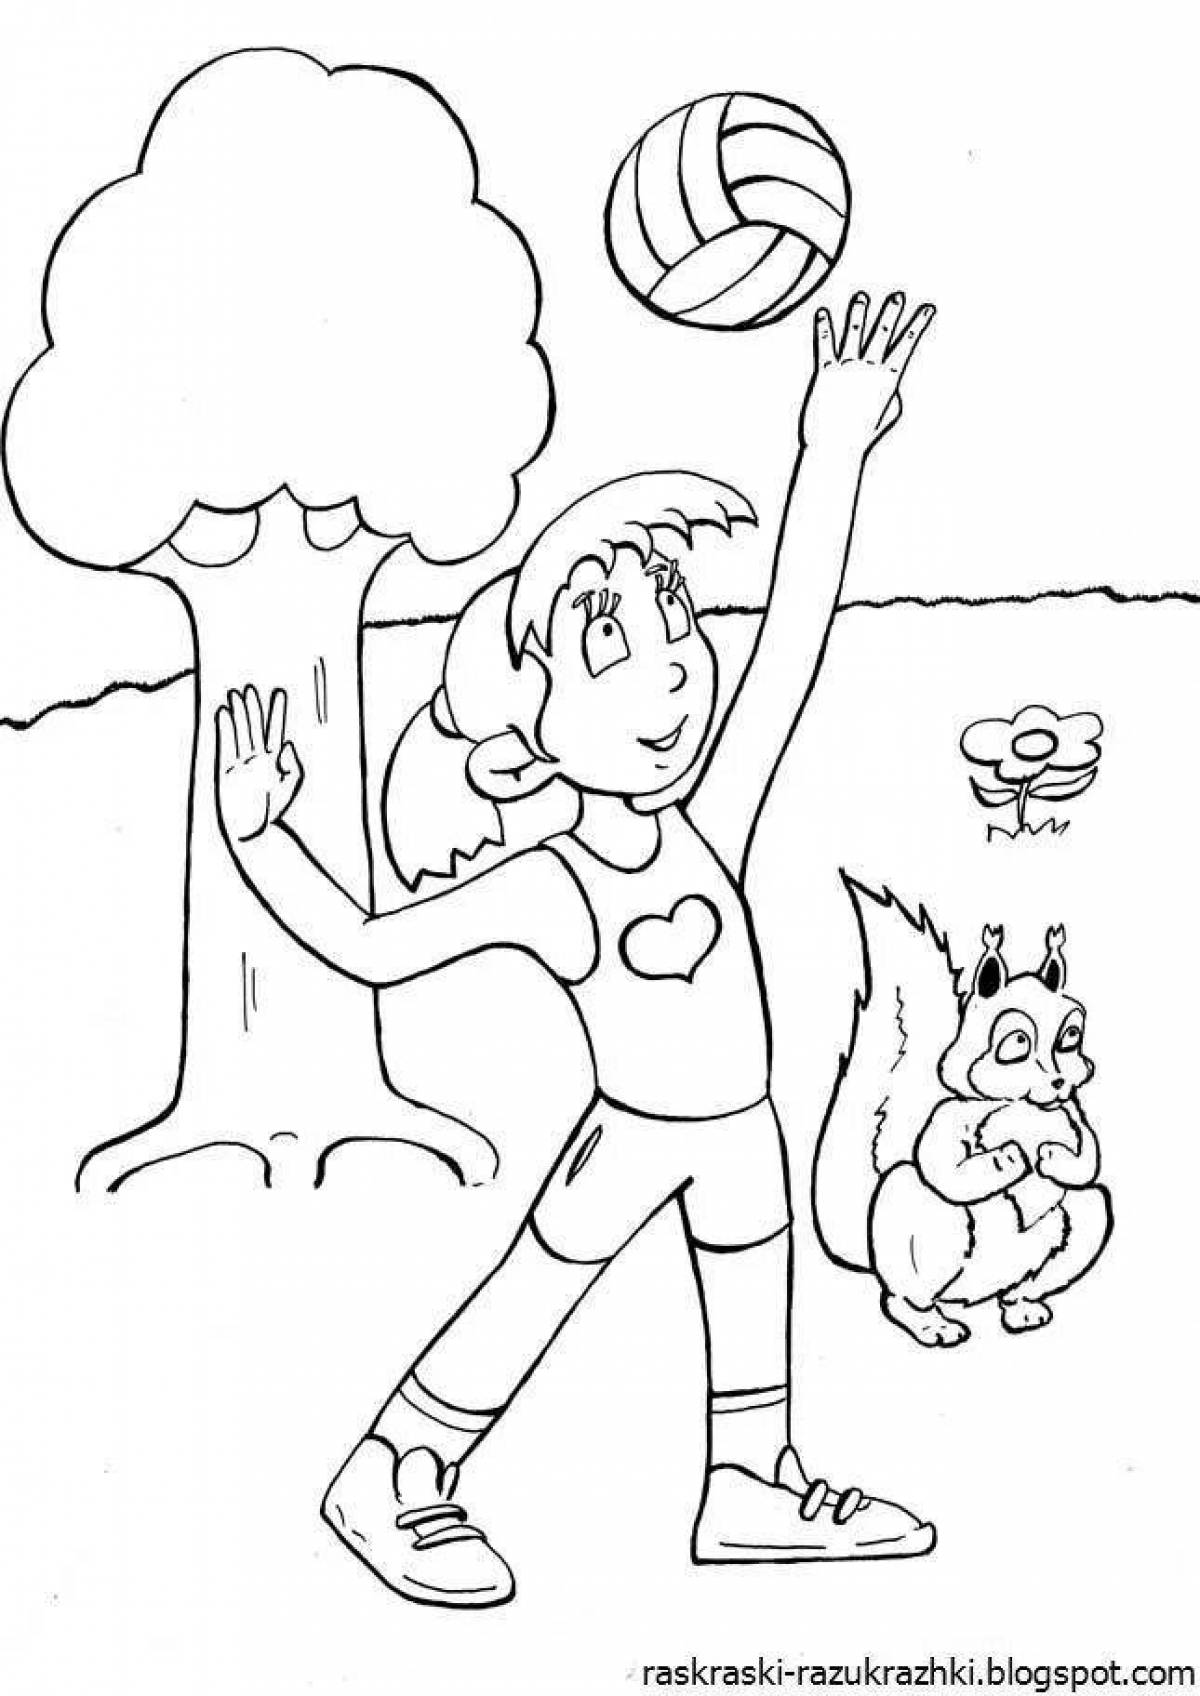 Serene lifestyle coloring page